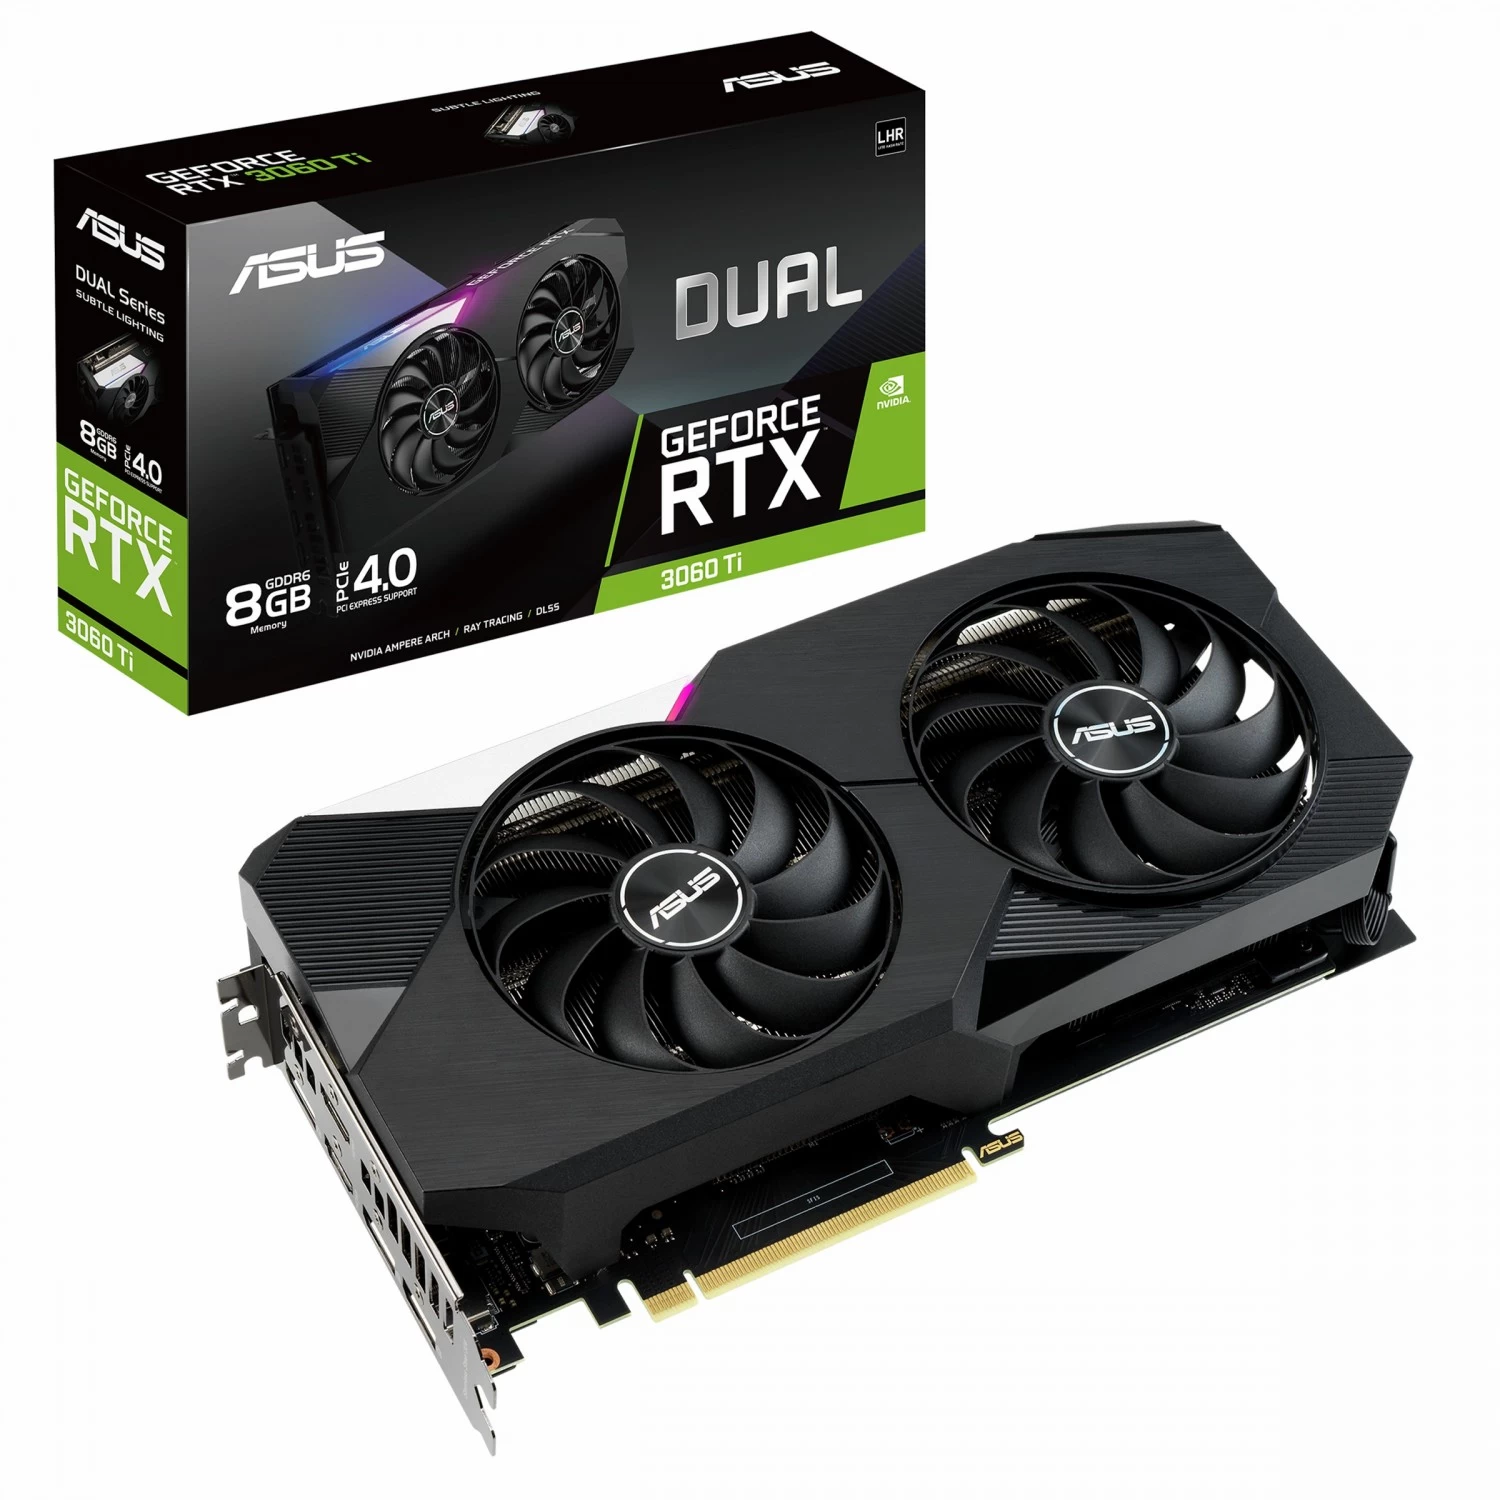 ASUS Dual GeForce RTX 3060 Ti Edition 8GB Package